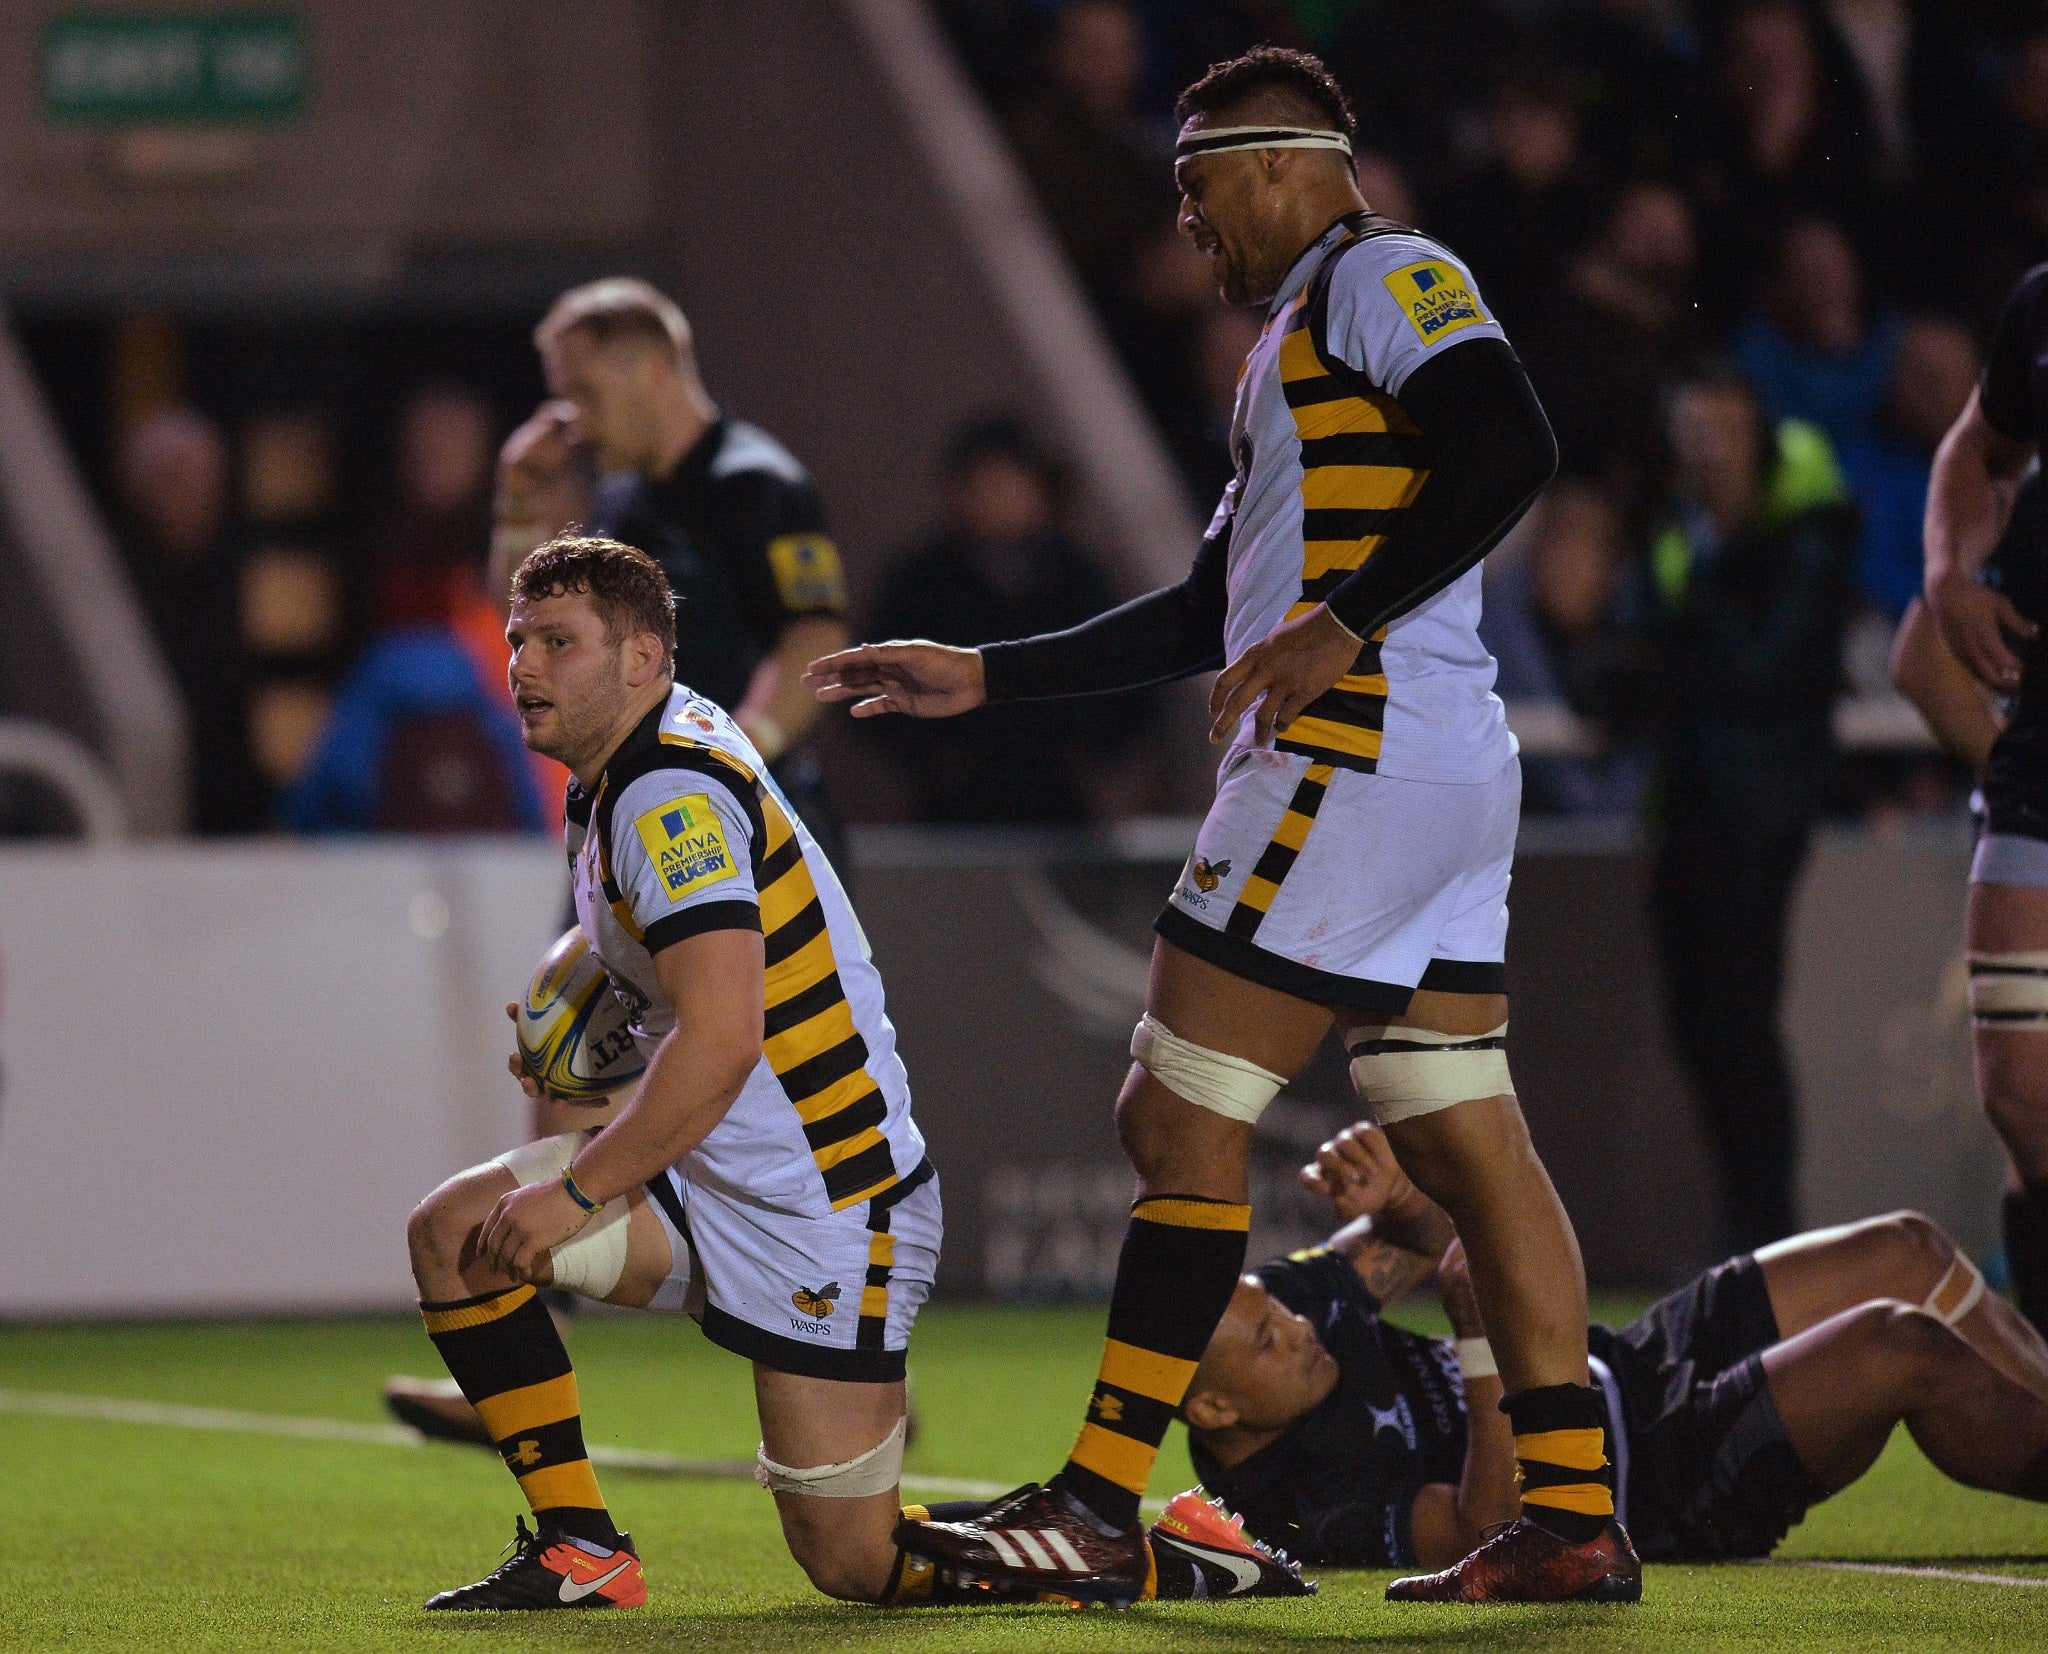 Thomas Youngs scores for Wasps in the first half